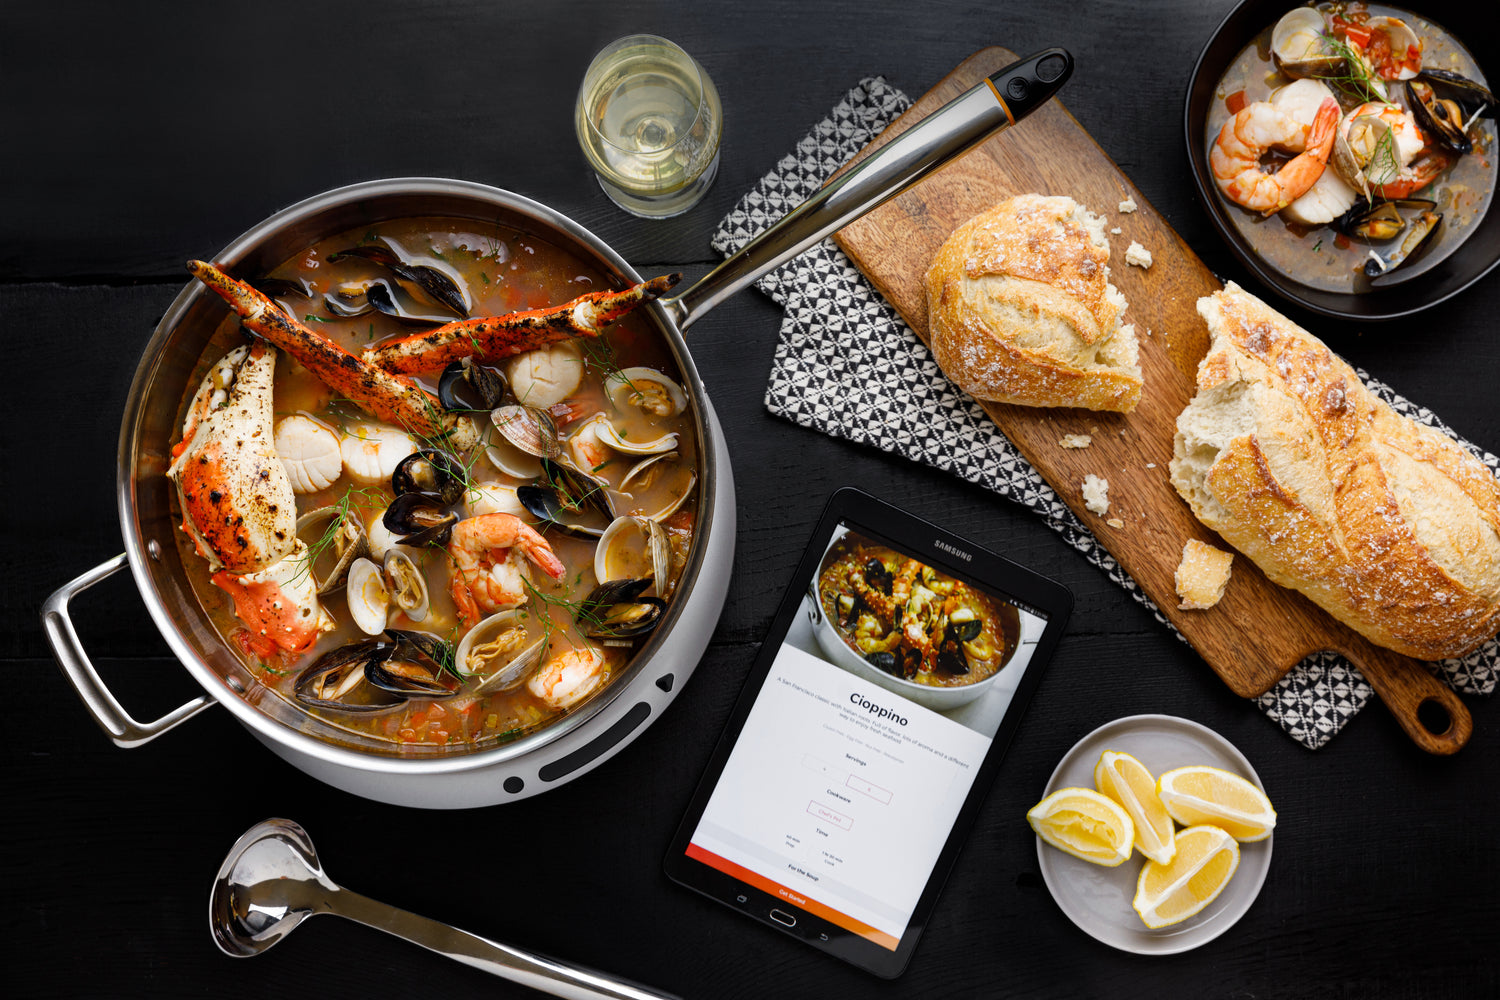 Induction Cooking – Hestan Culinary